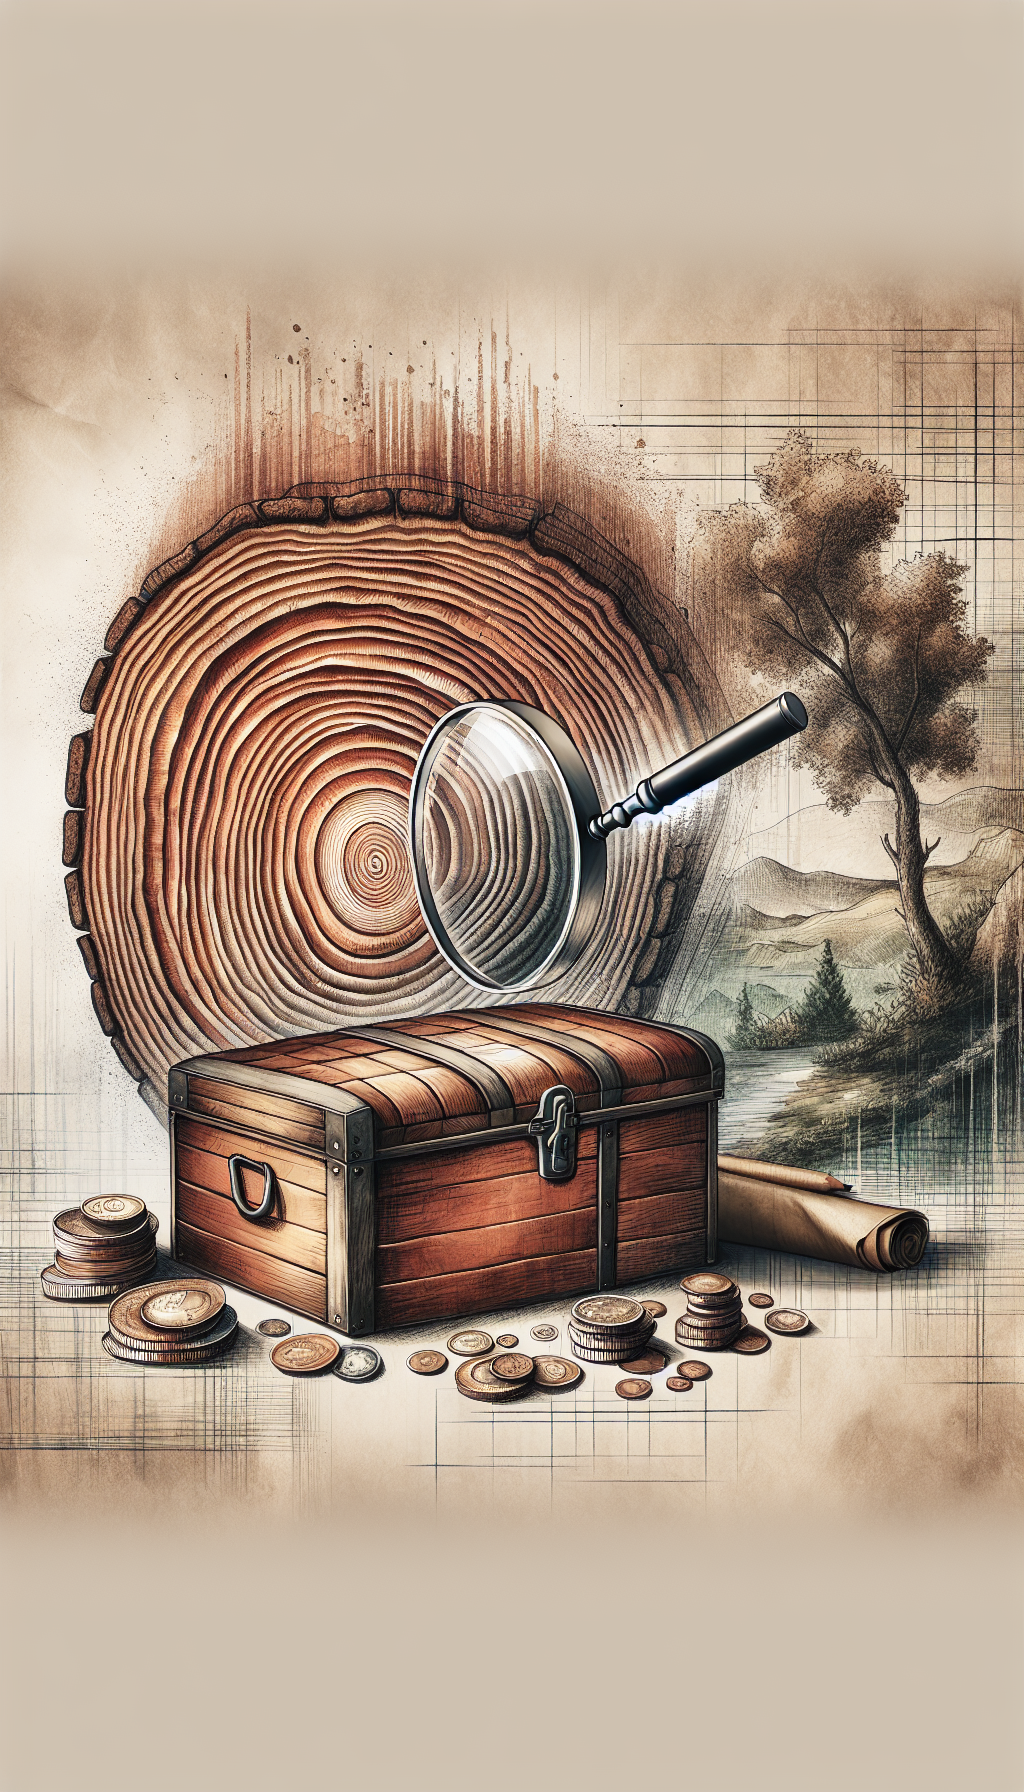 An aged, textured wooden chest sits center stage with a magnifying glass hovering over, revealing growth rings like those on a tree, each ring marking a decade. Coins and antique jewelry spill out, signifying value. The background shifts artistically from a pen sketch on the left to a watercolor palette on the right, symbolizing a spectrum of time and valuation methods.